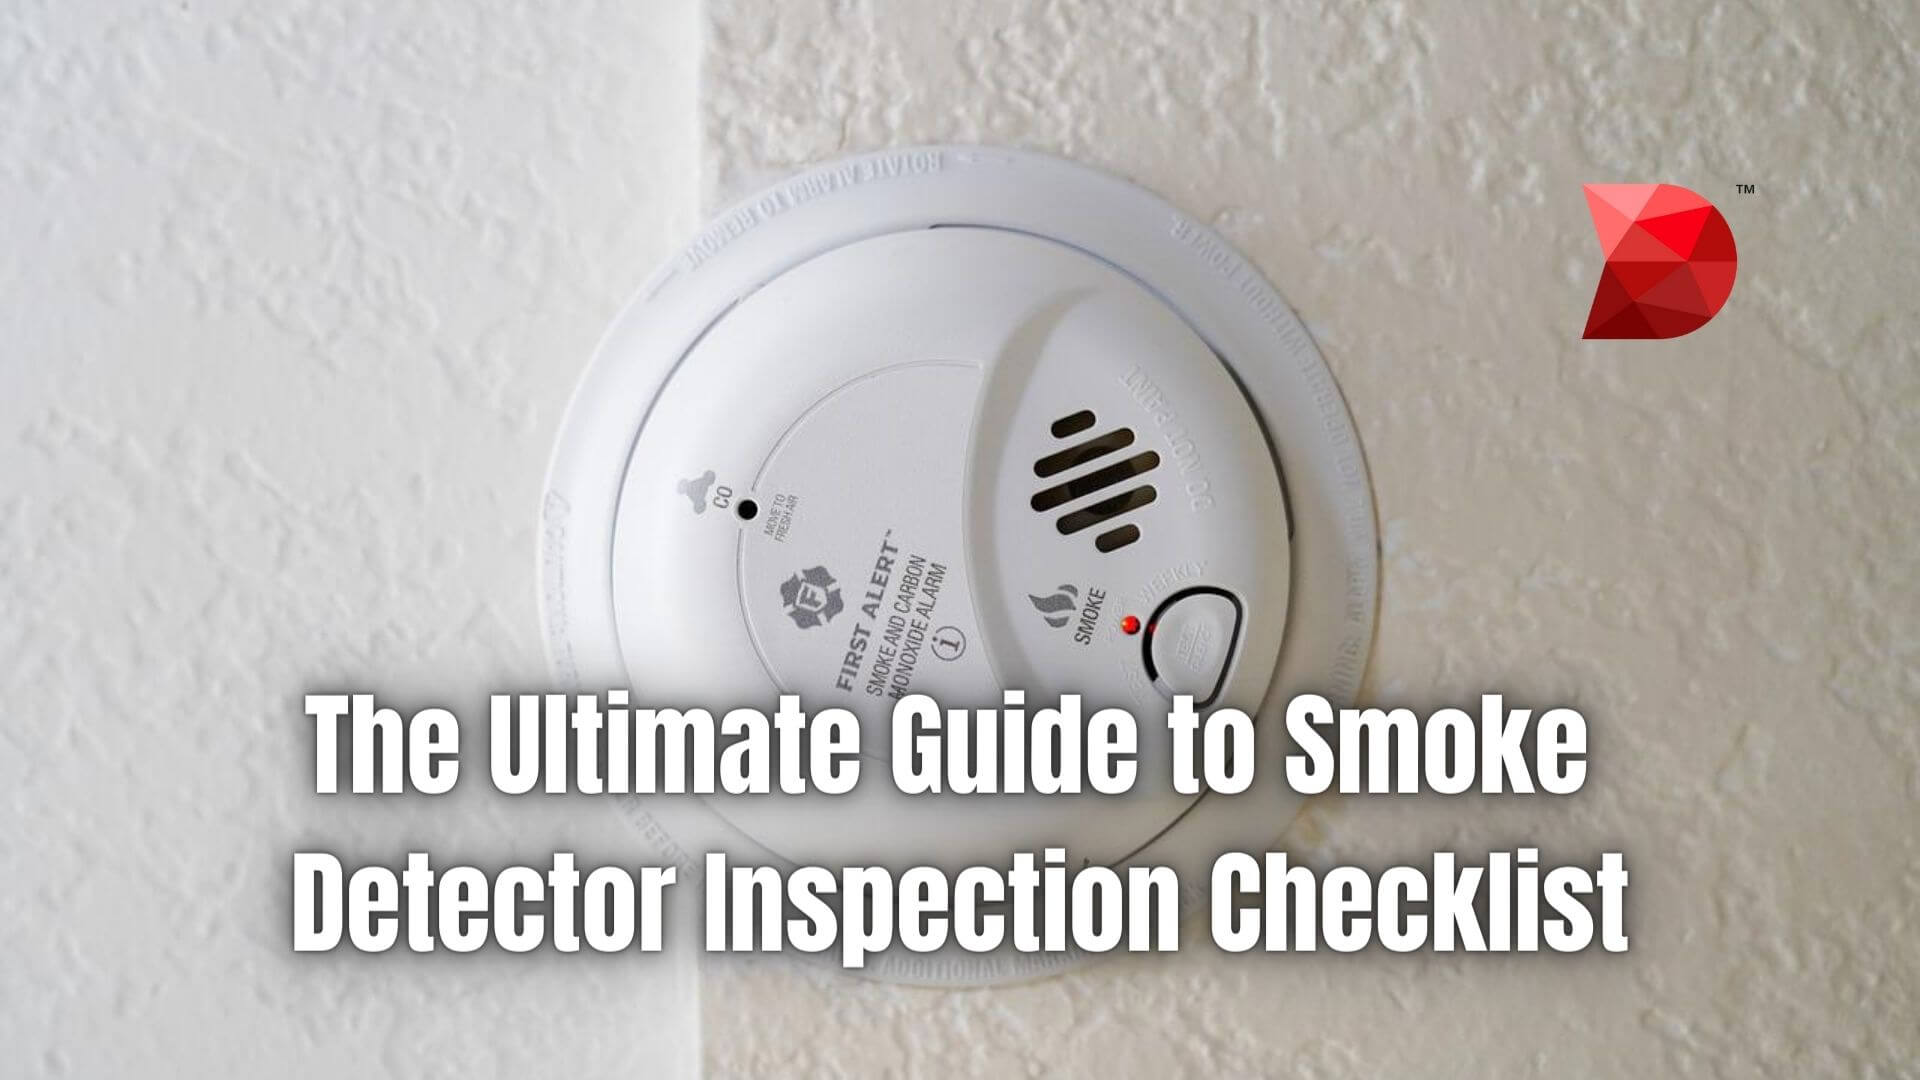 The Ultimate Guide to Smoke Detector Inspection Checklist